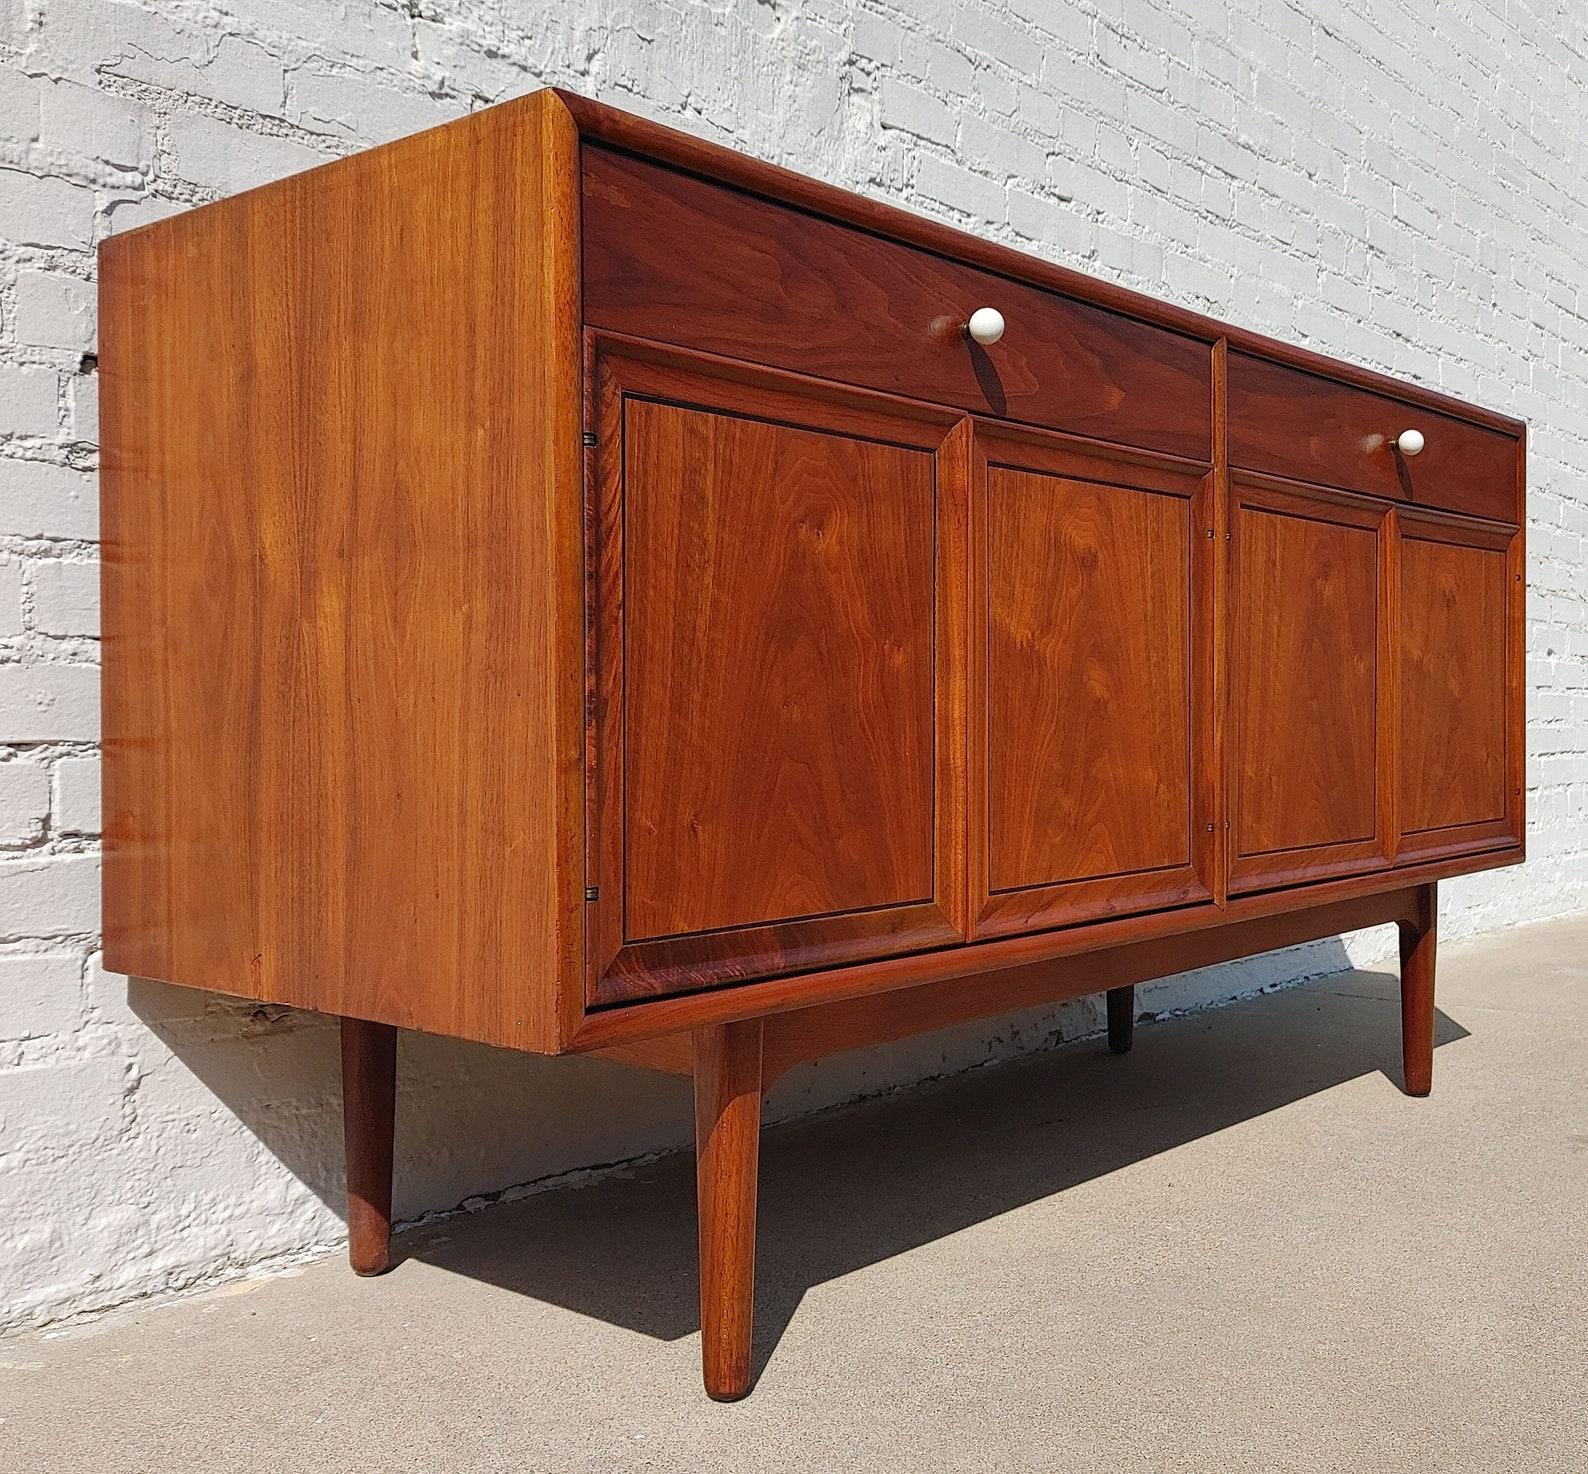 Mid Century Modern Drexel Declaration Buffet

Above average vintage condition and structurally sound. Top has been refinished and does not have original factory finish.
Back sides have a couple areas where patched. Both bottom cabinets have